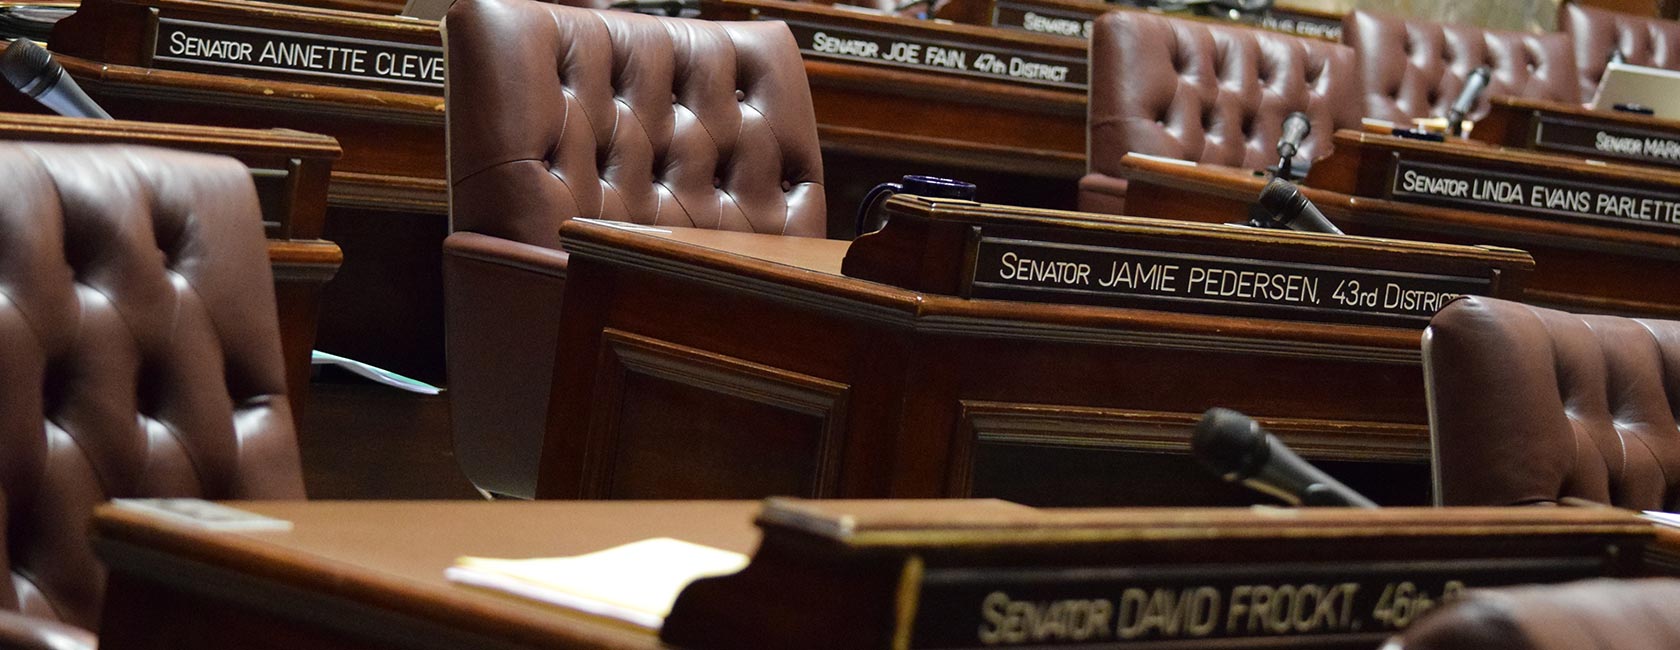 Legislative session now adjourned, the floor of the Washington State Senate will be vacant until lawmakers return this January. [Zach Powers/PLU]